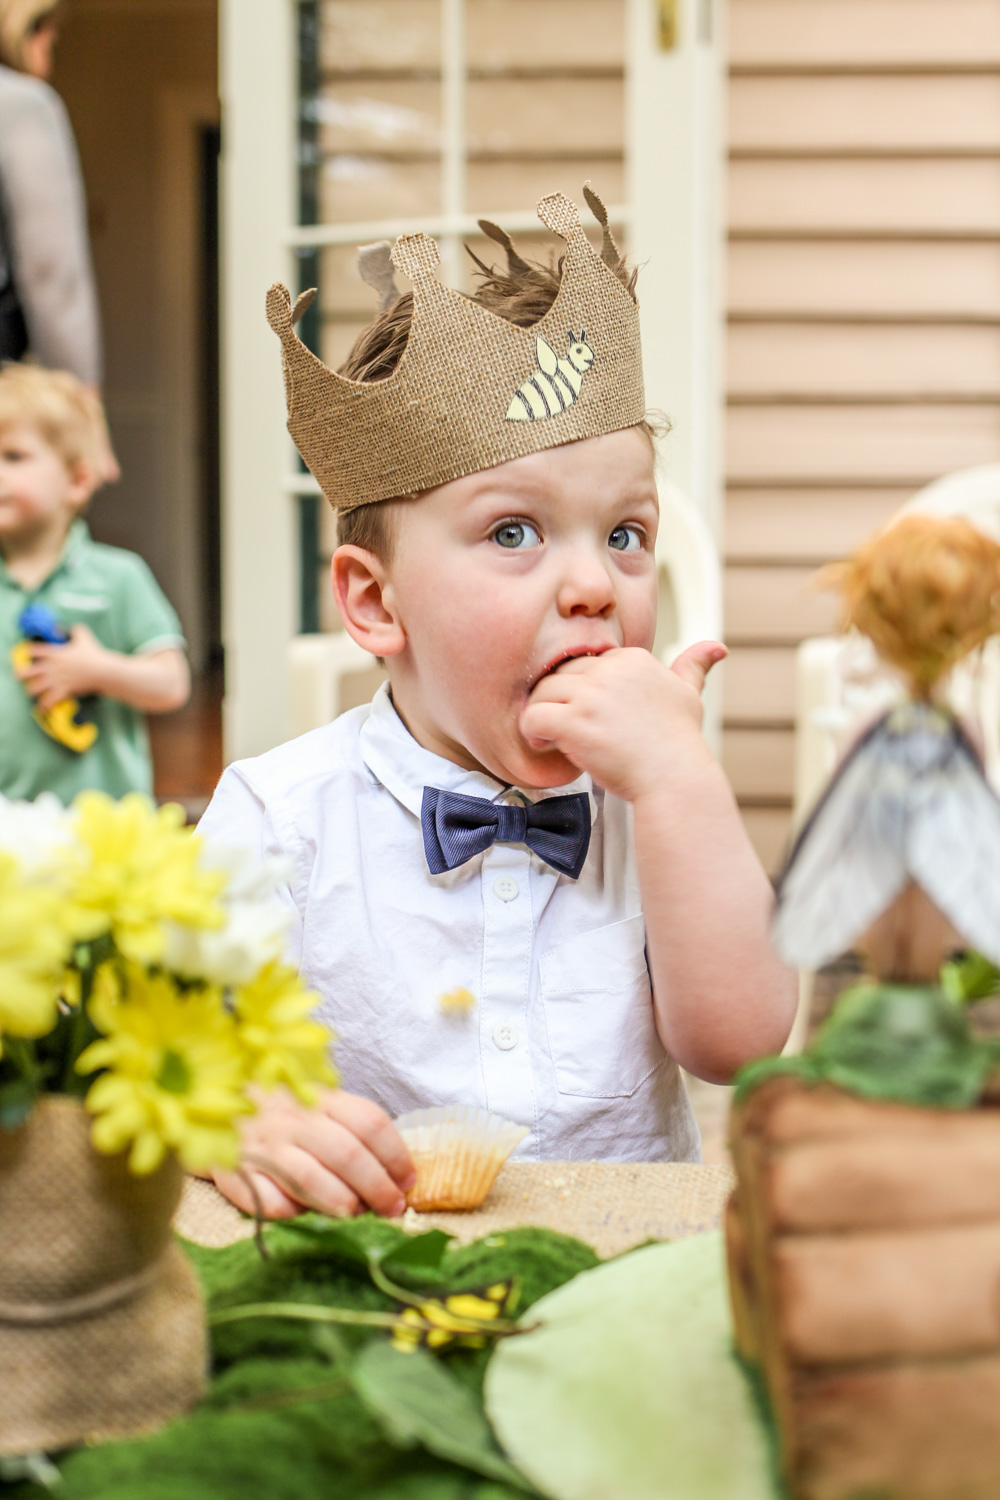 For more boys and unisex kids first birthday party inspiration visit the Goldfields Girl blog